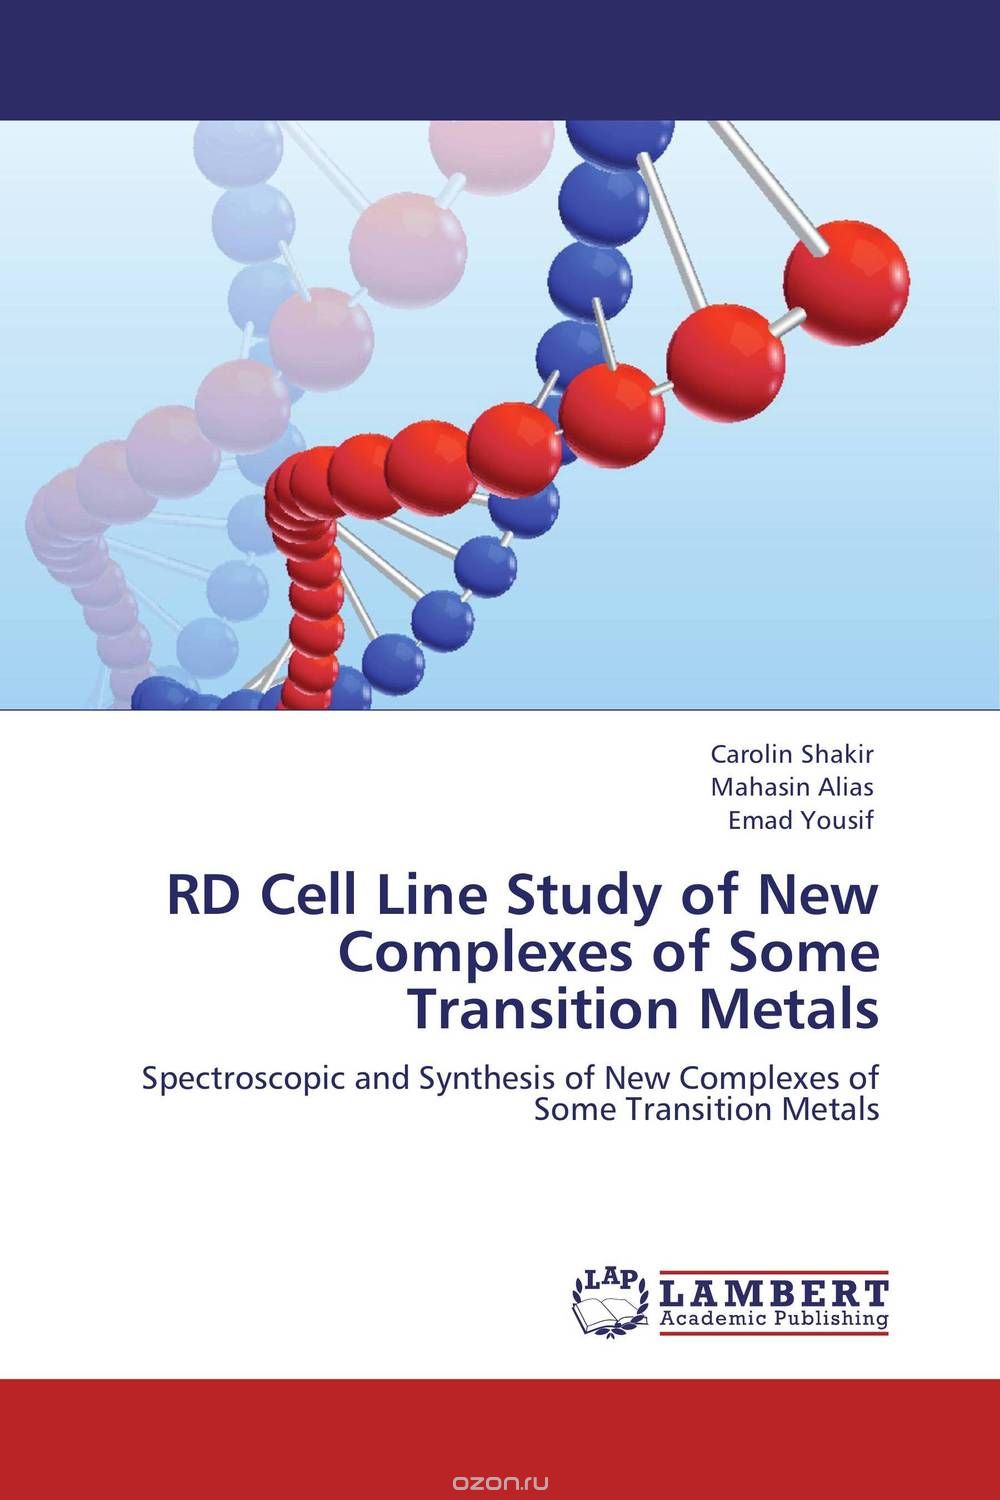 RD Cell Line Study of New Complexes of Some Transition Metals